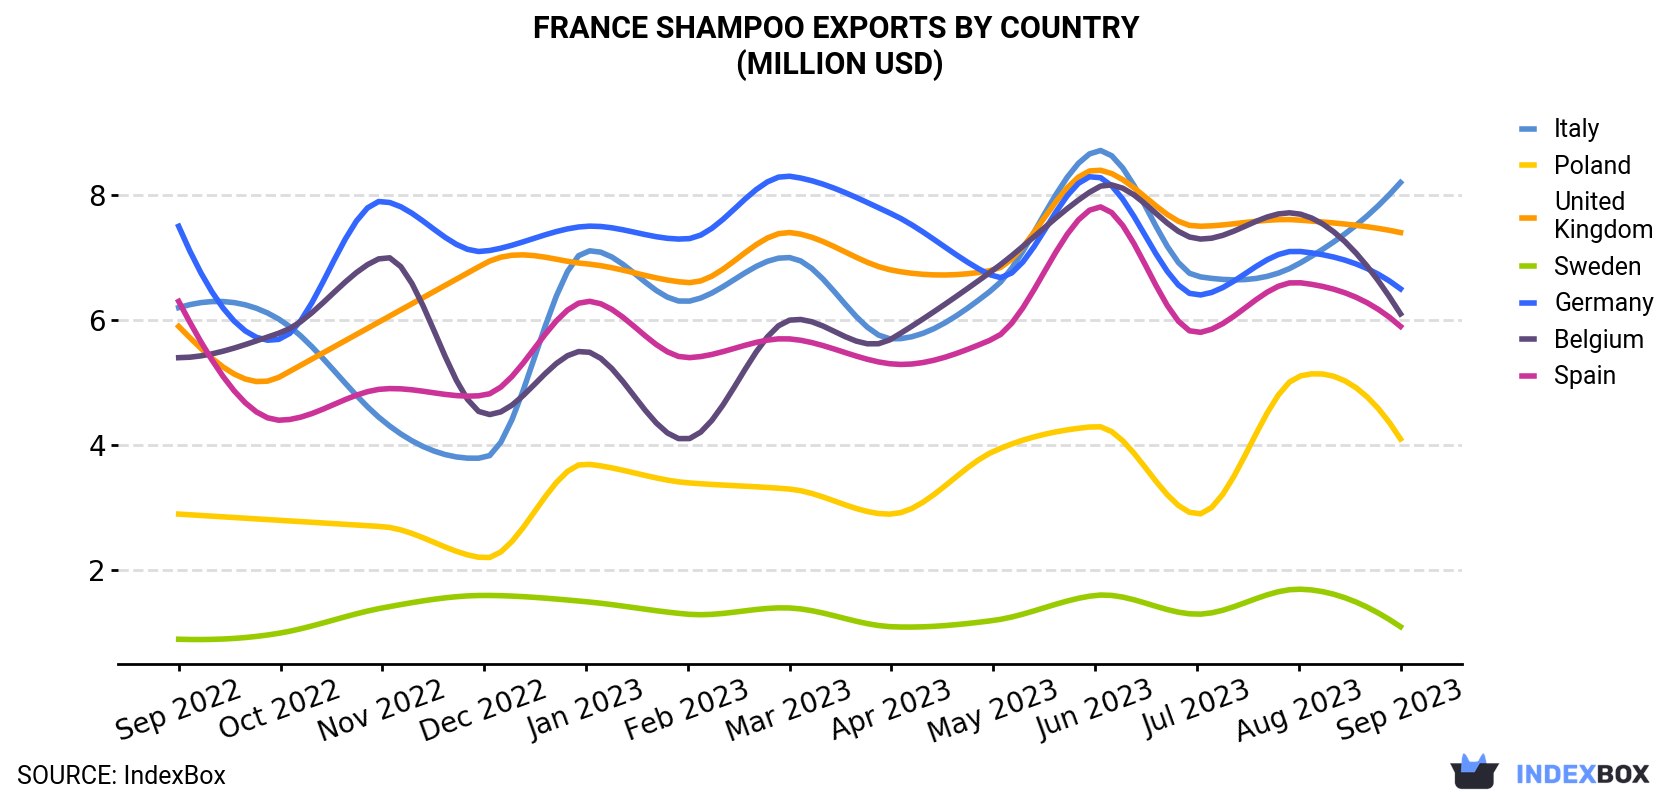 France Shampoo Exports By Country (Million USD)